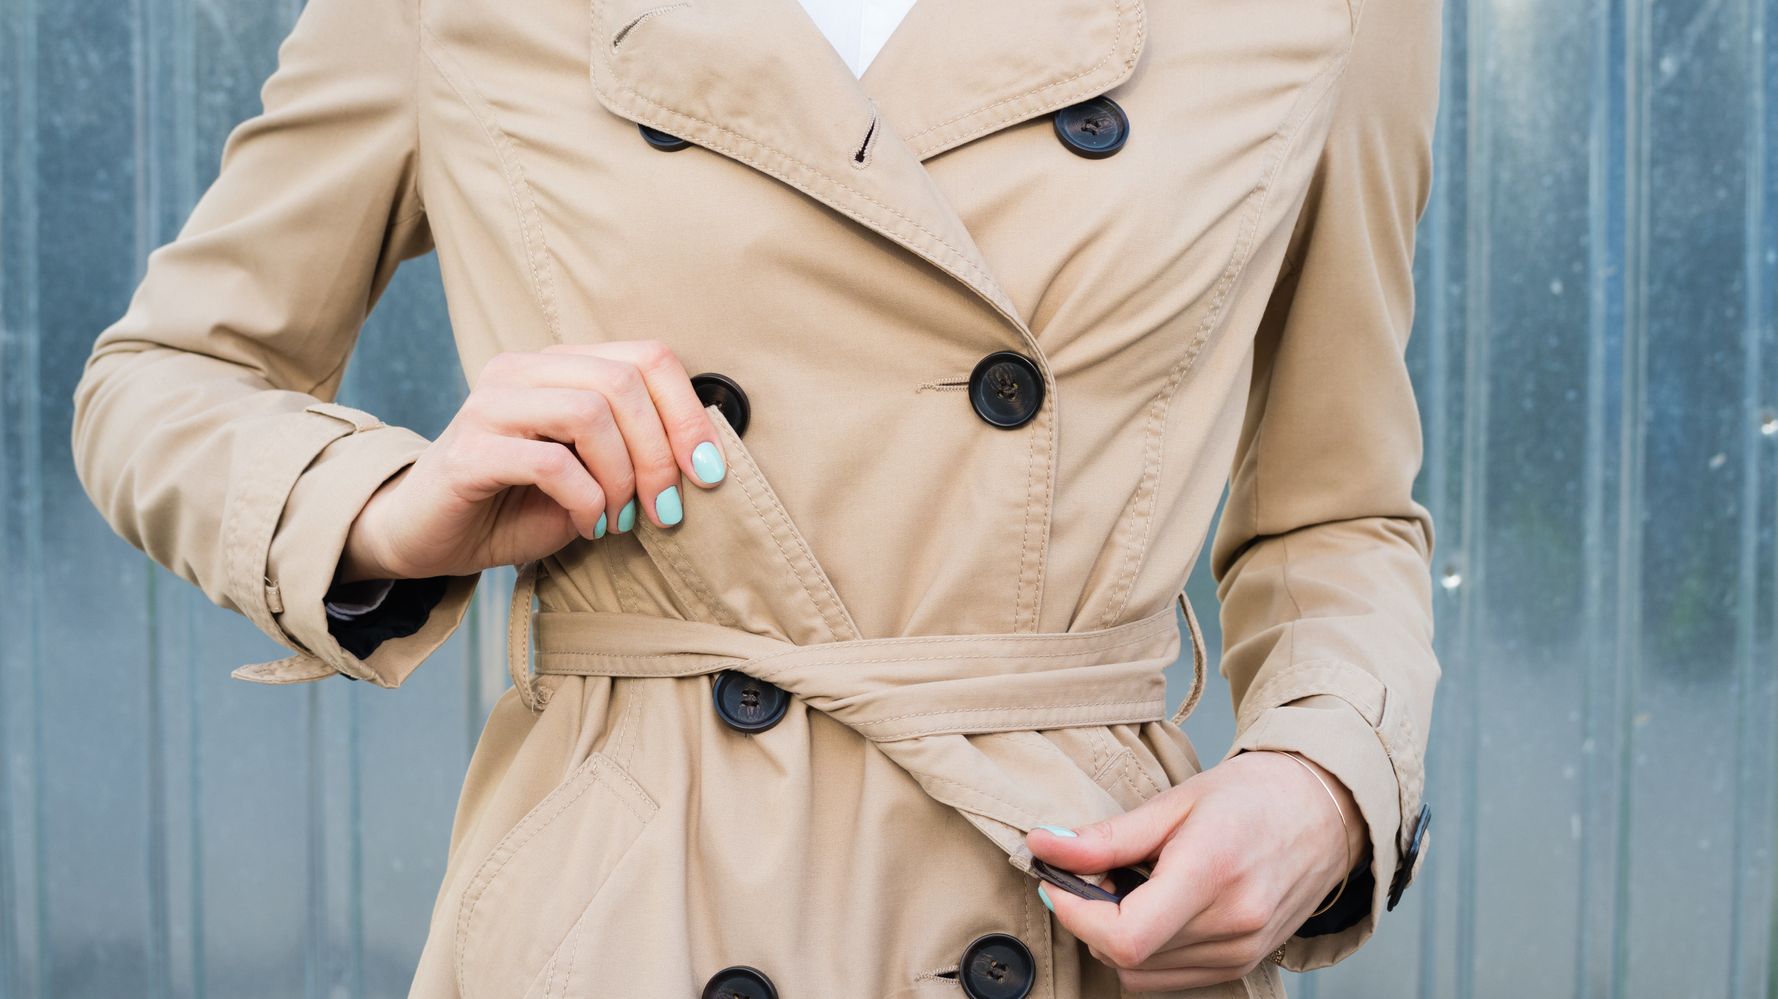 How to Style a Trench Coat, According to an Expert: 3 Trench Coat